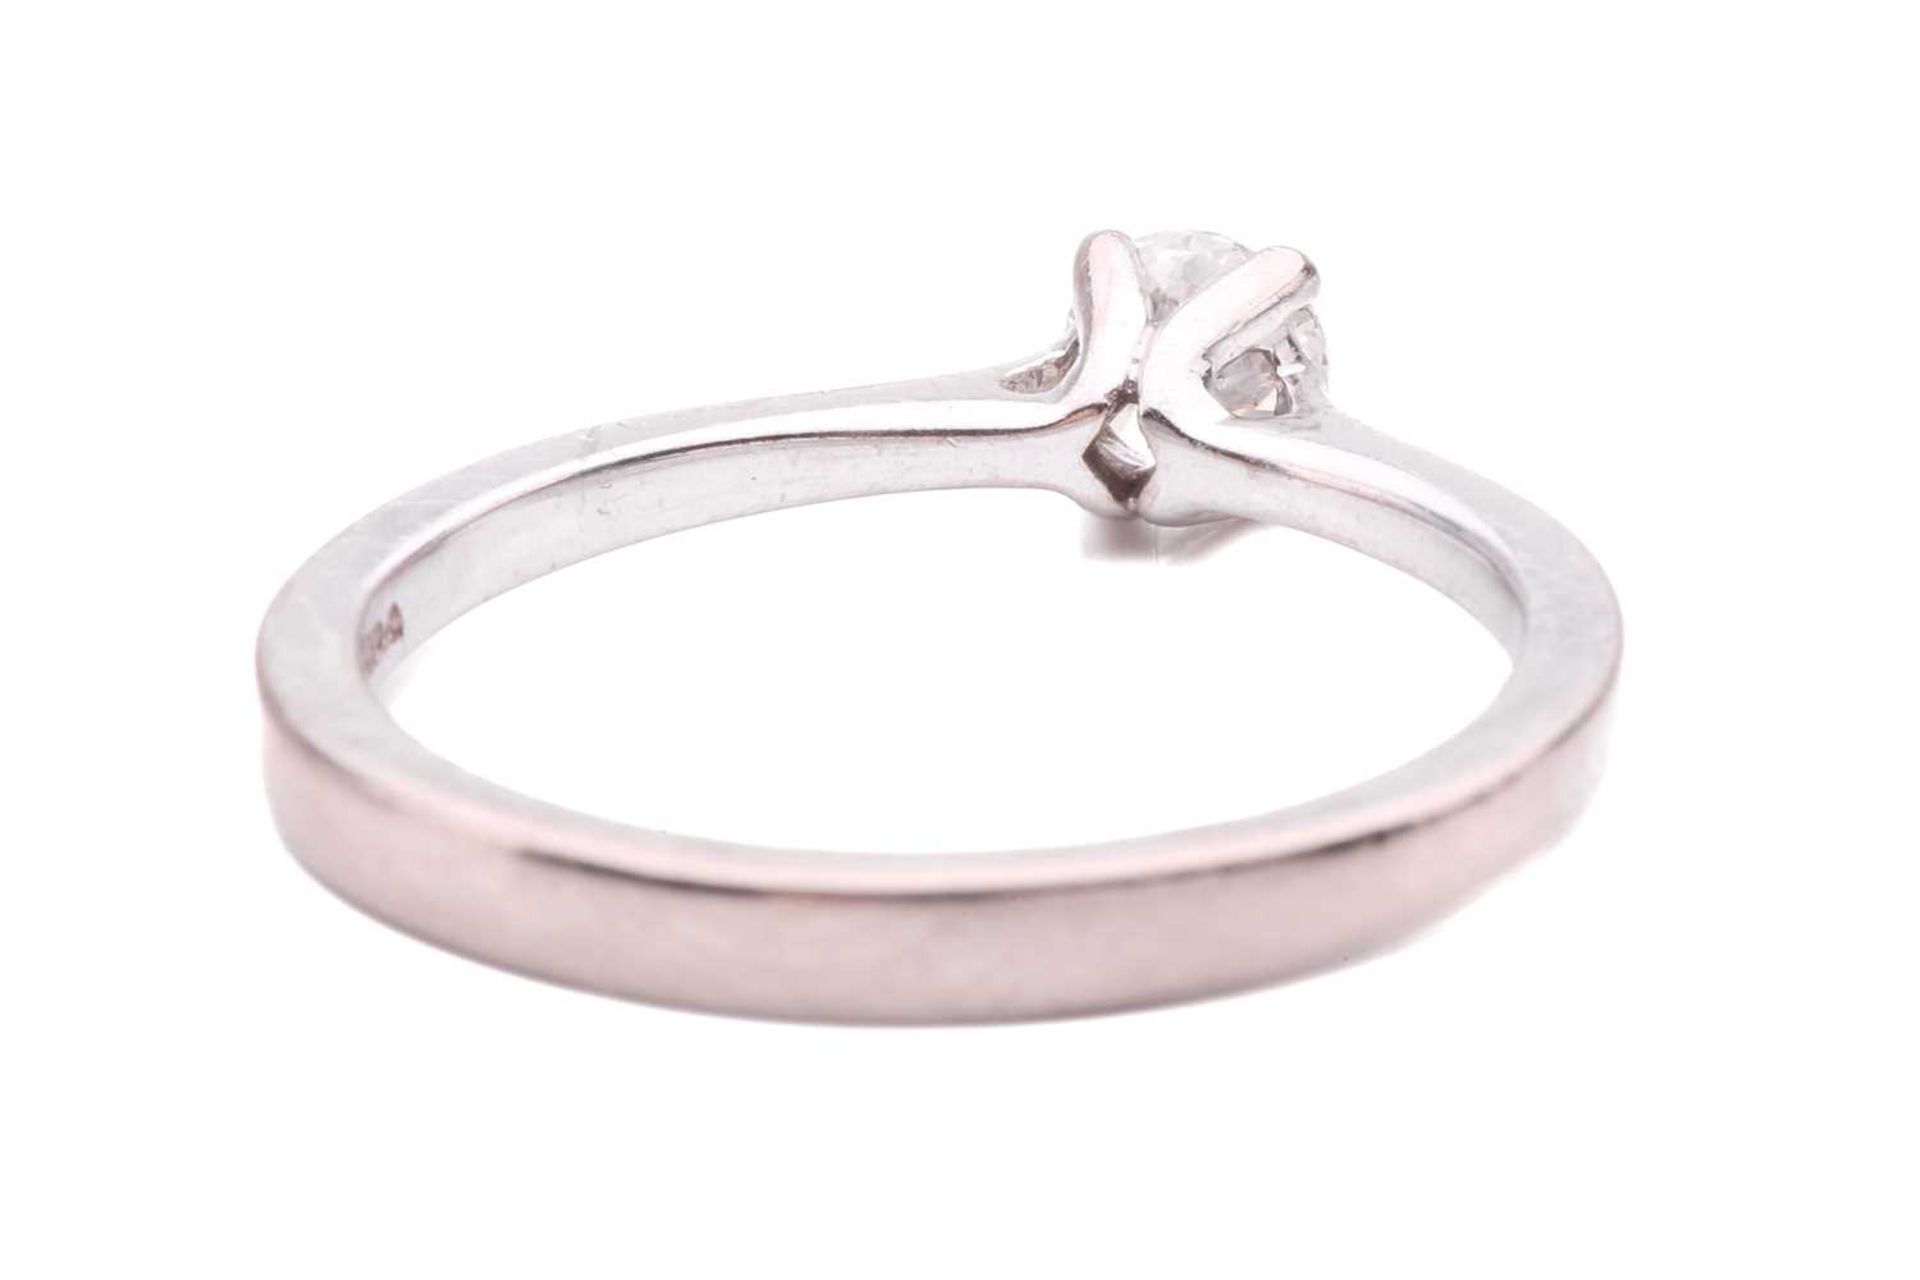 A diamond solitaire ring, set with a round brilliant cut diamond with an estimated weight of 0.35ct, - Image 4 of 4